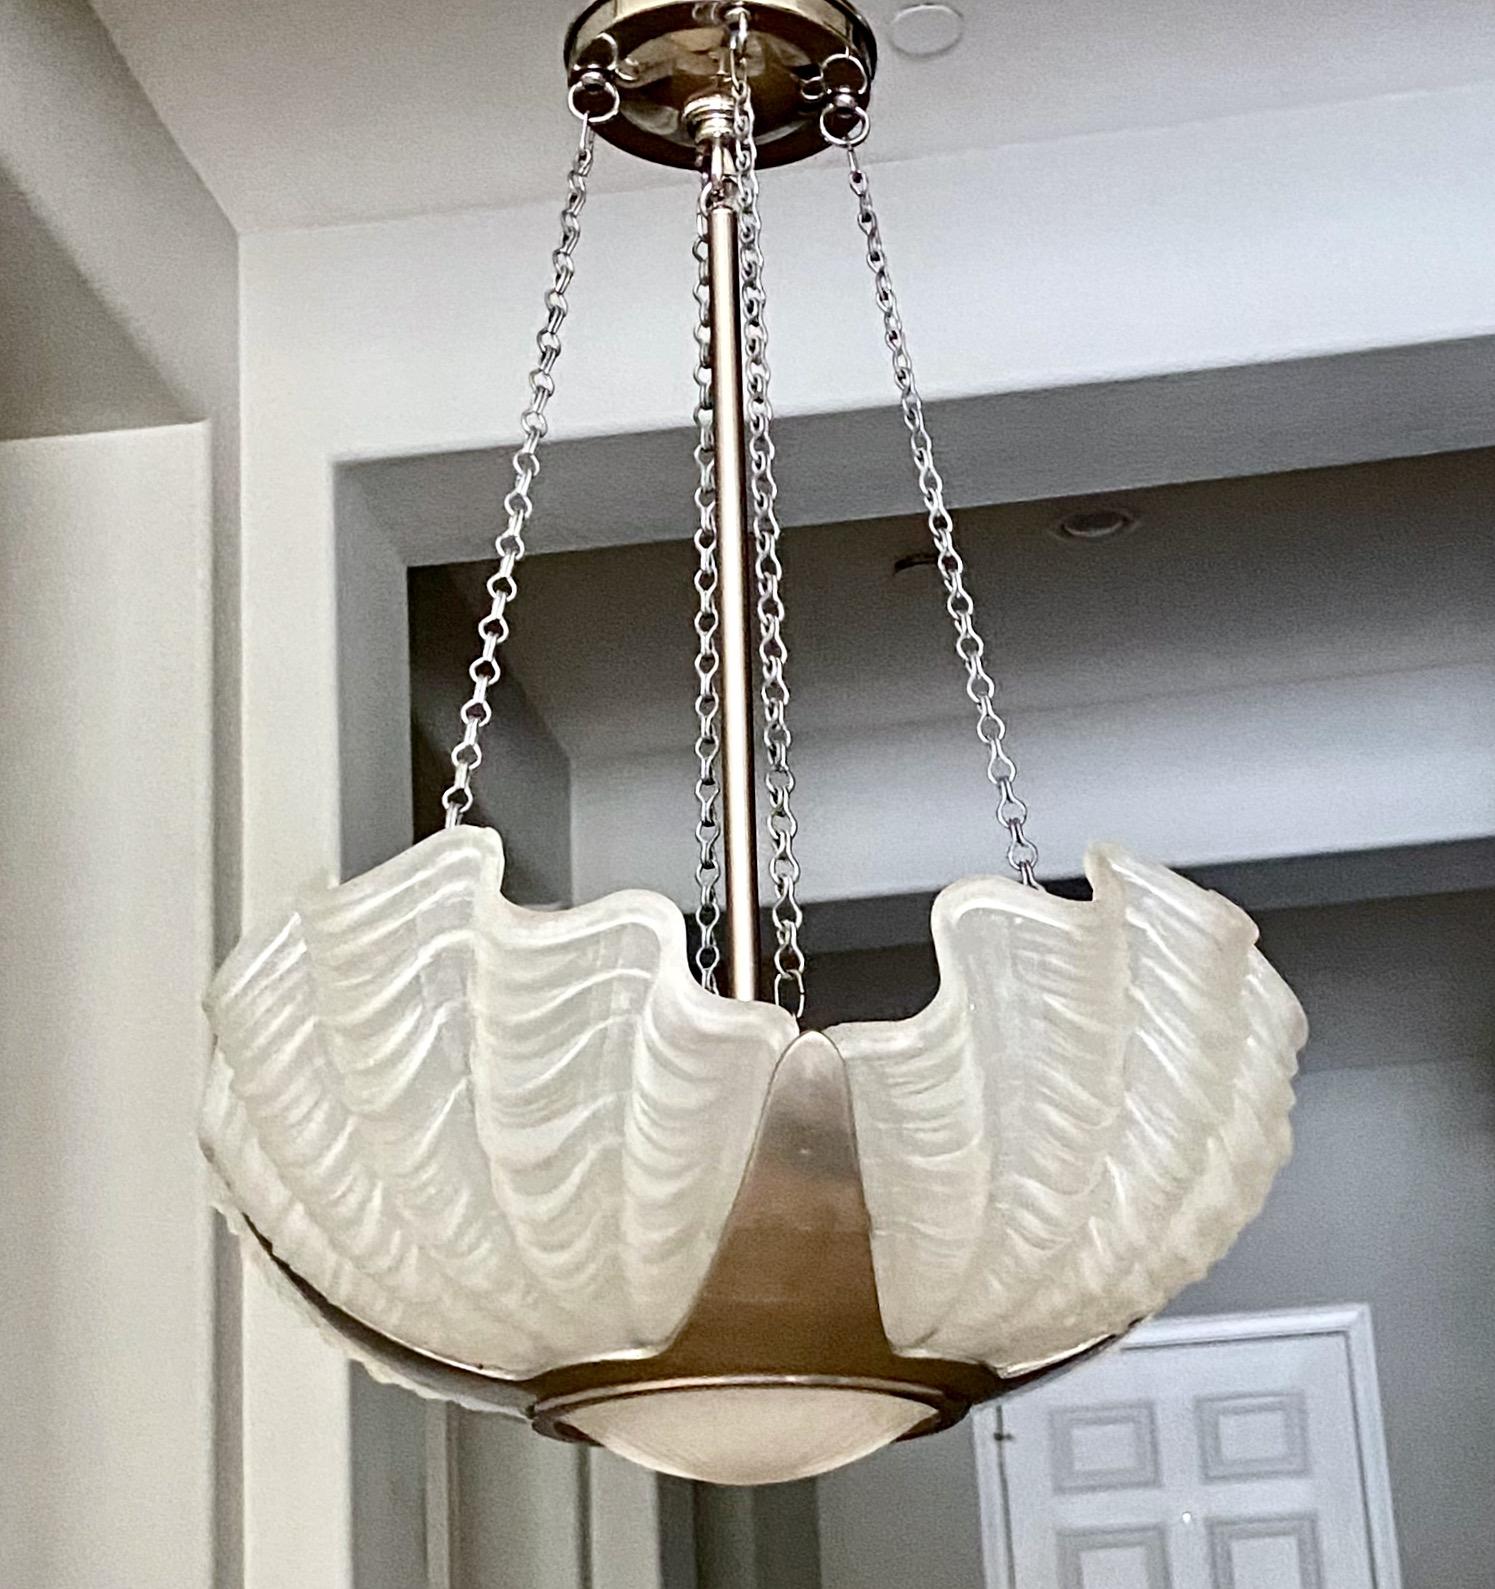 Mid-20th Century French Deco Frosted Glass Clamshell Chandelier Pendant Light